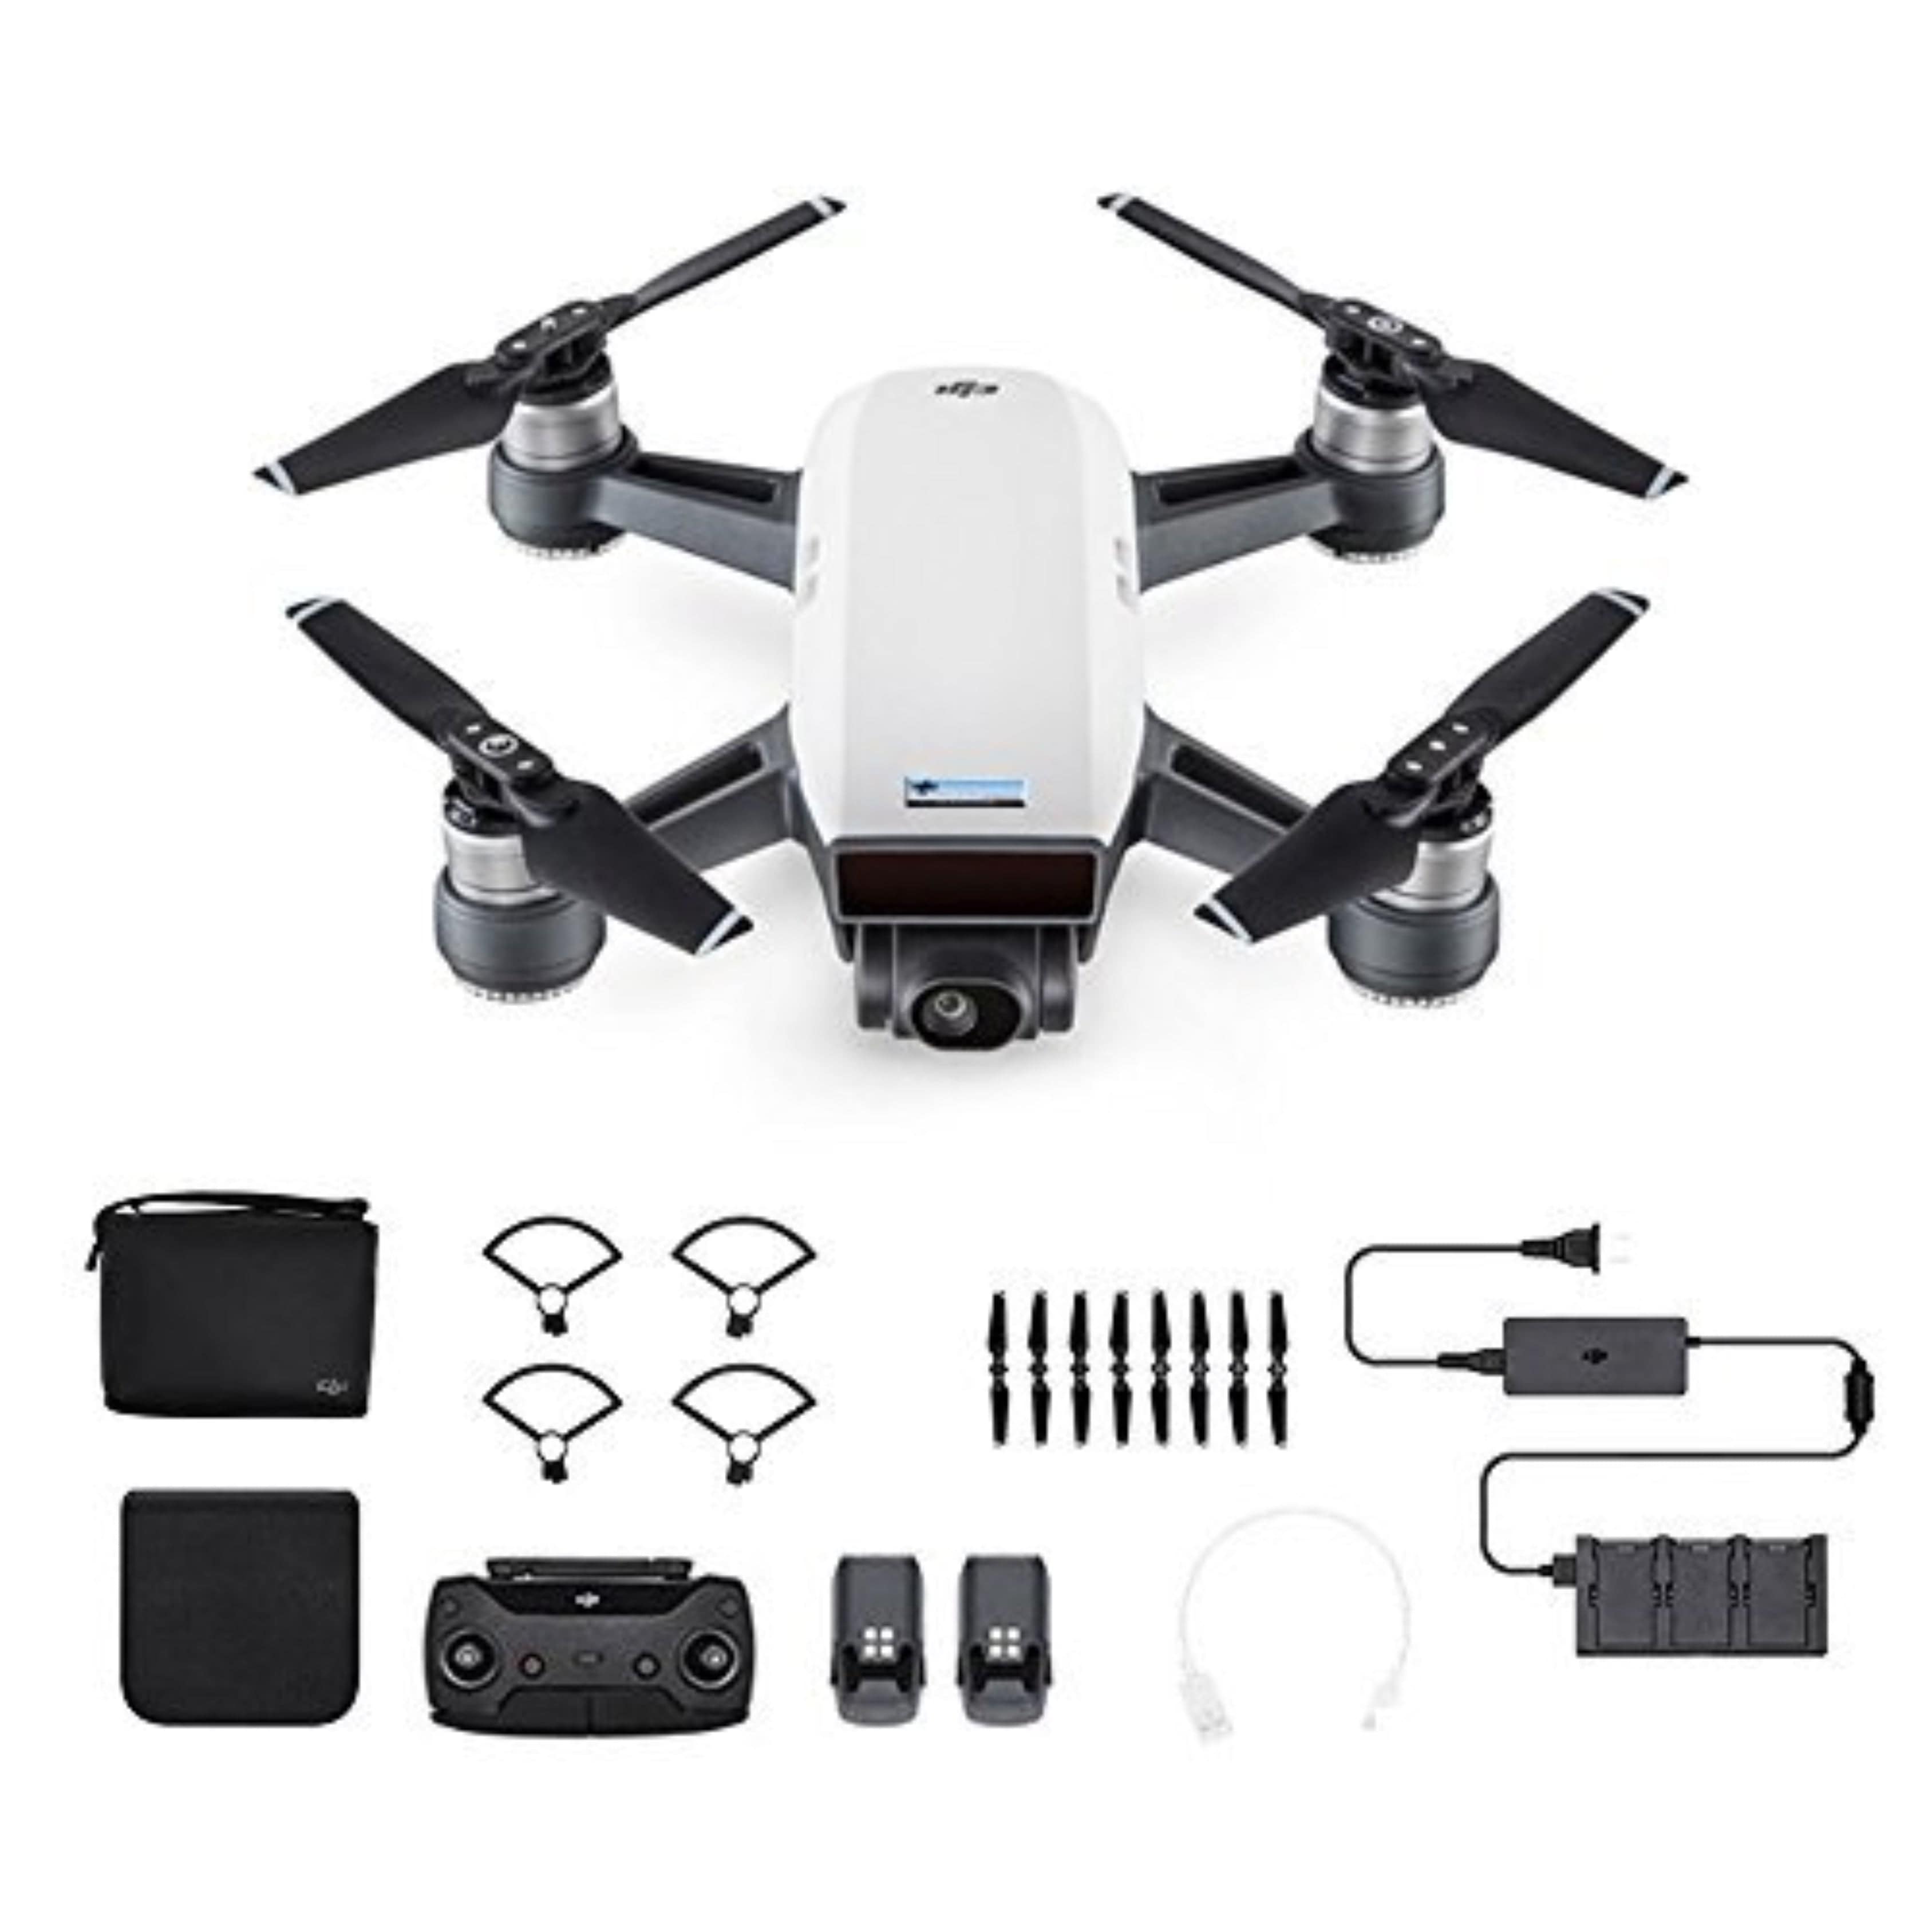 DJI - Spark Mini Quadcopter Drone Fly More Combo with Free 16GB 